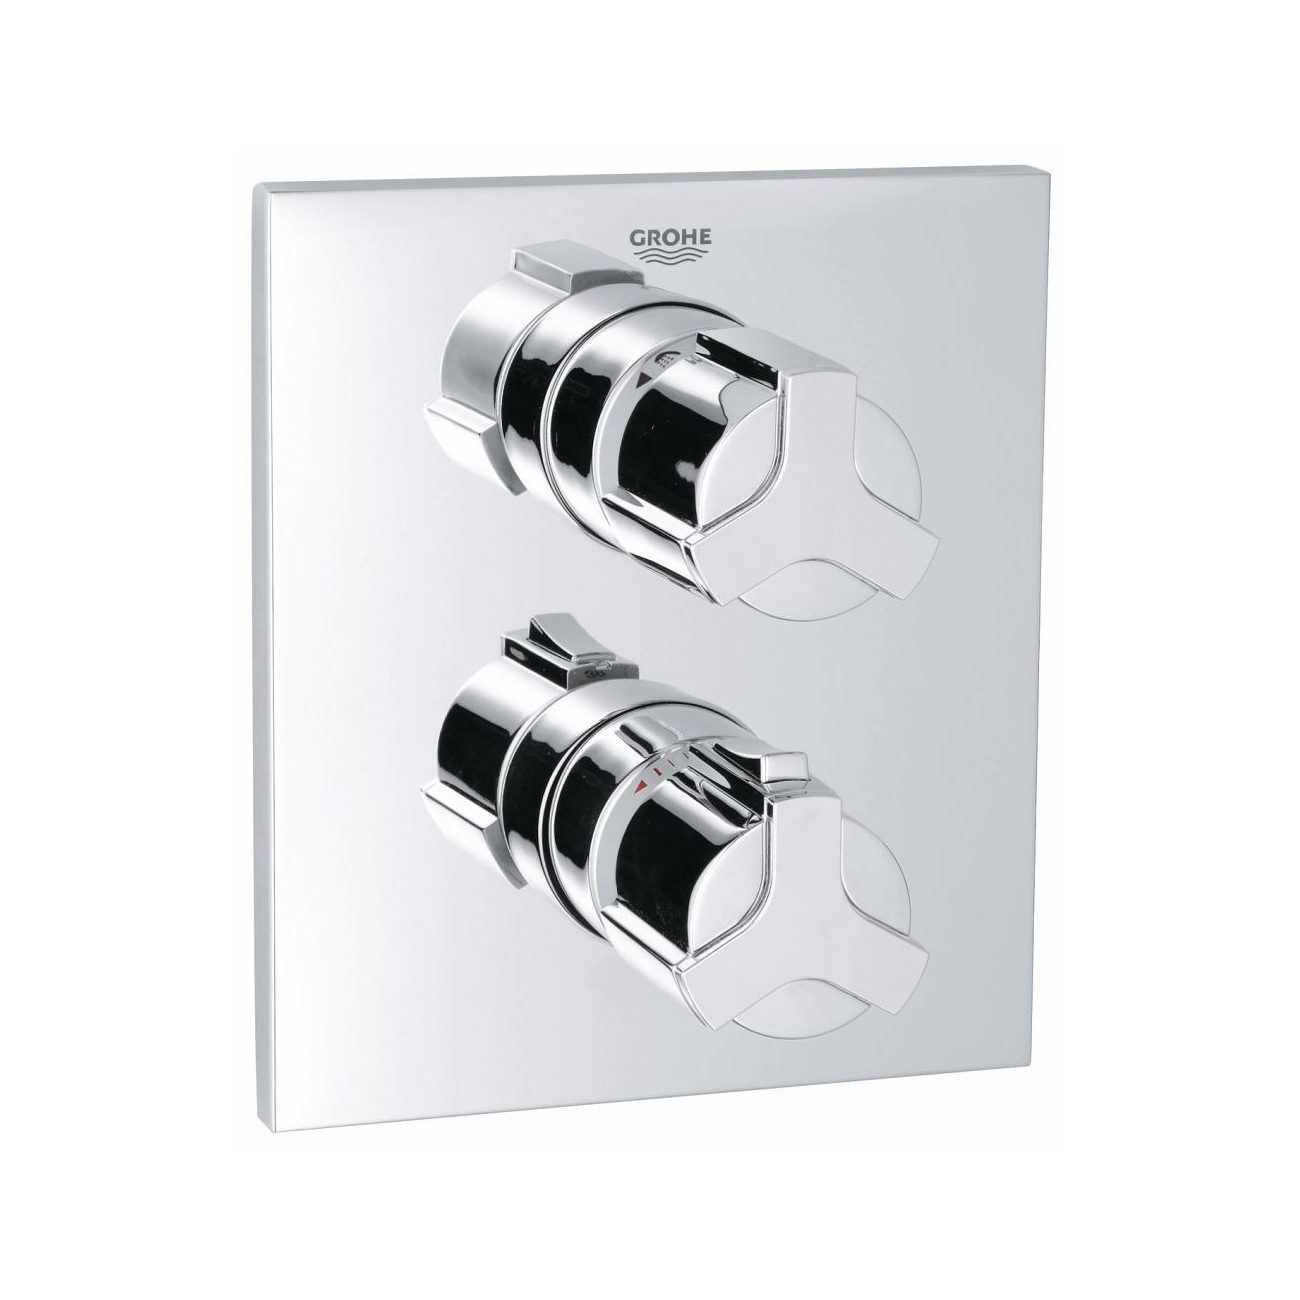 GROHE ALLURE Thermostat with integrated 2-way diverter for shower